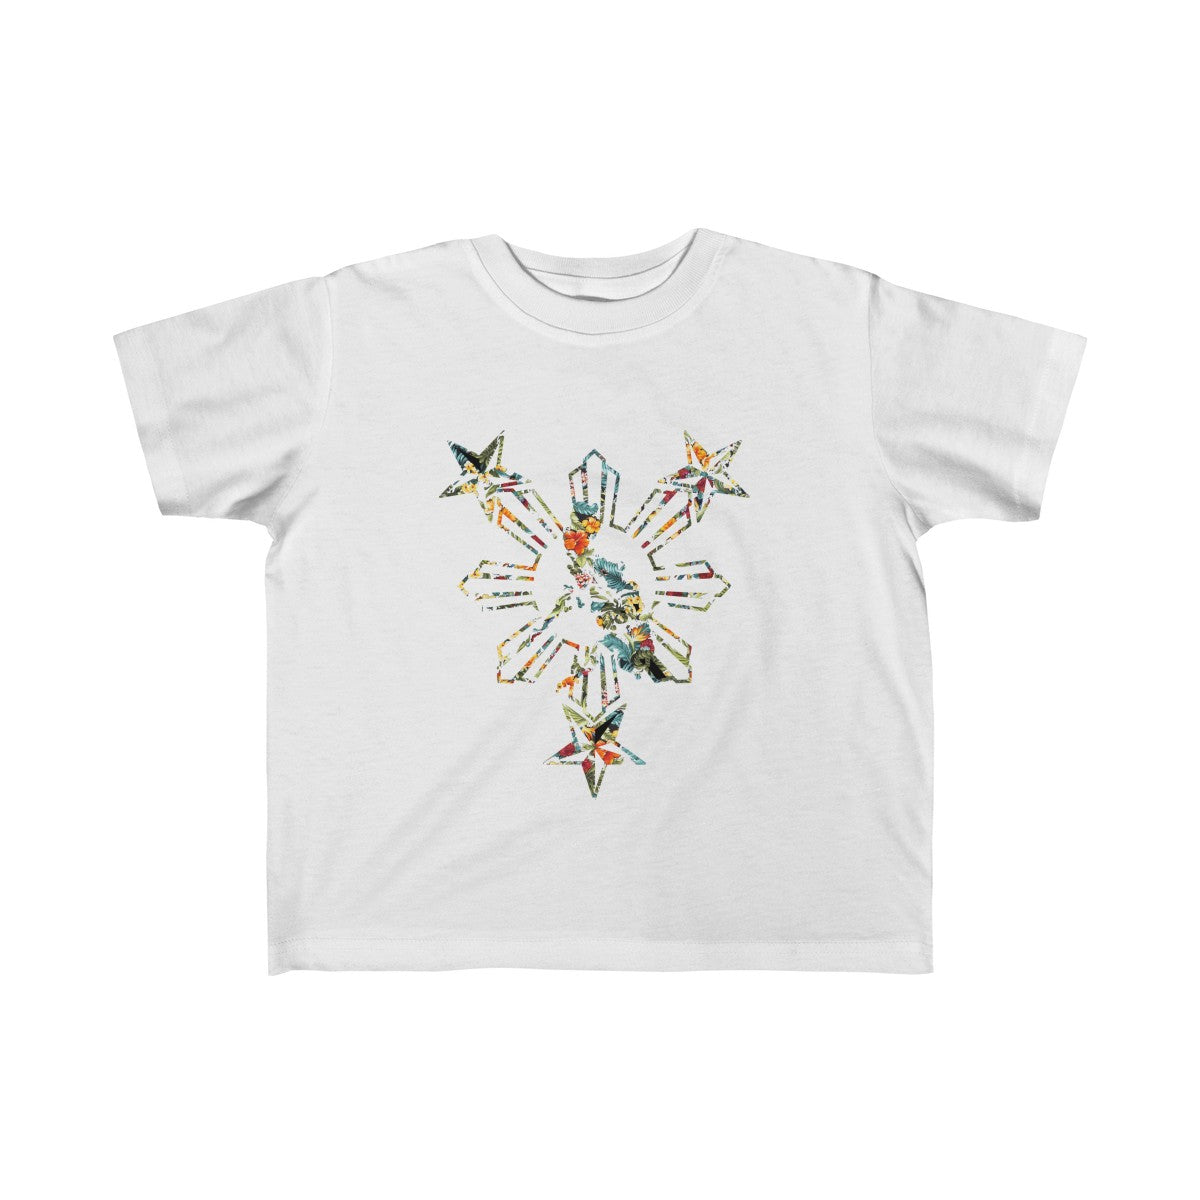 Philippines 3 Star and Sun Floral Tee Kids